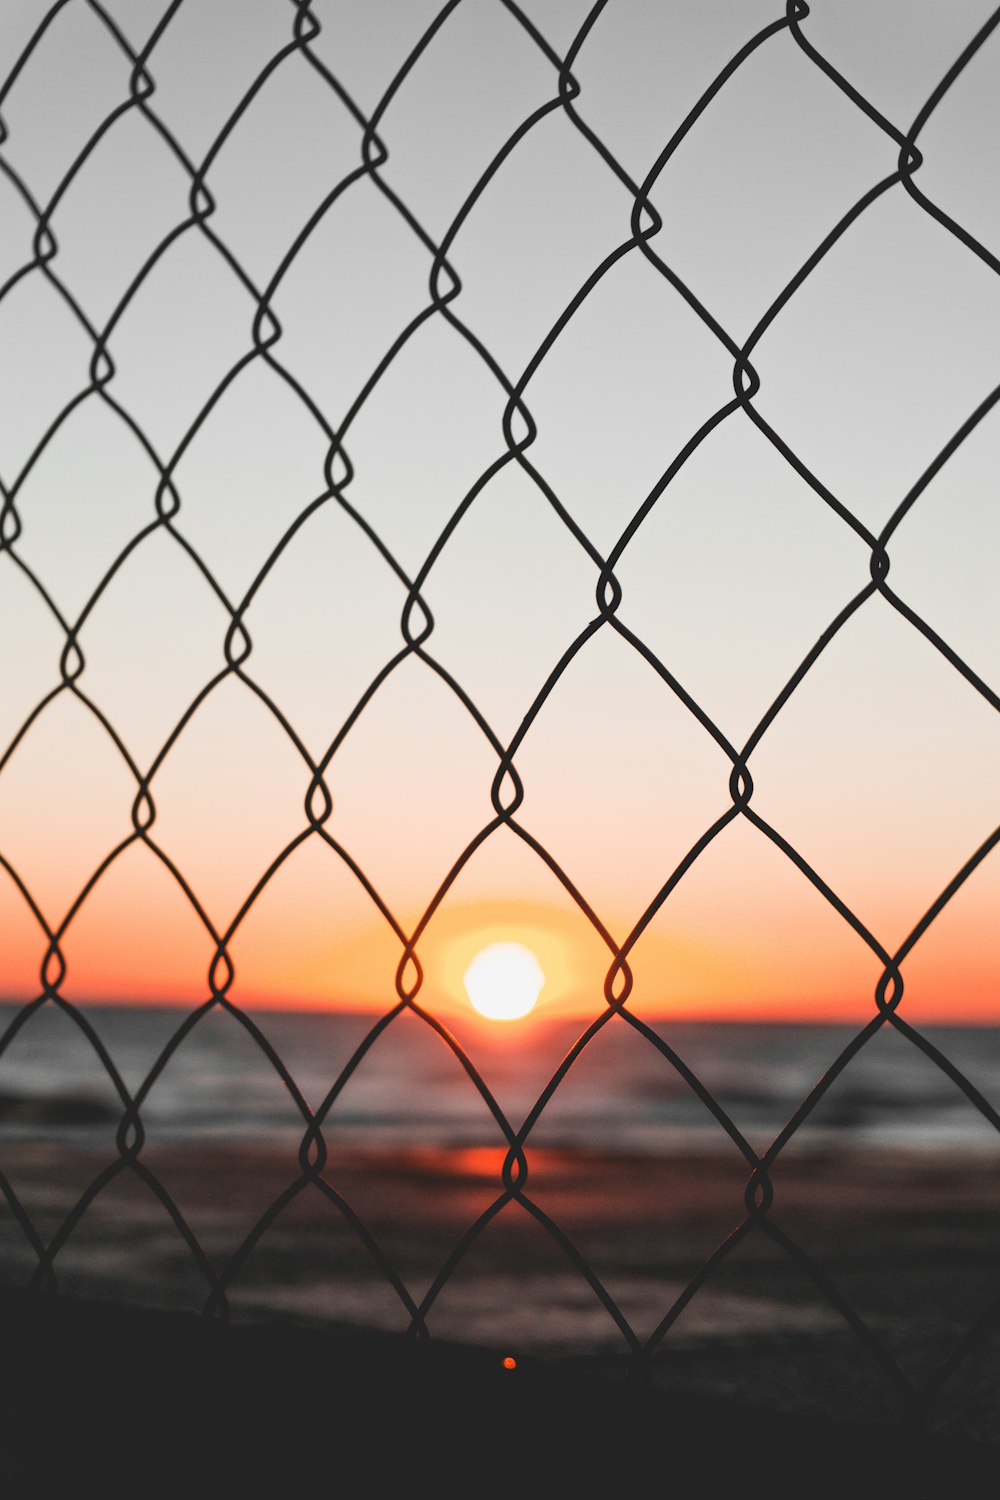 close-up photography of iron wire fence during golden hour